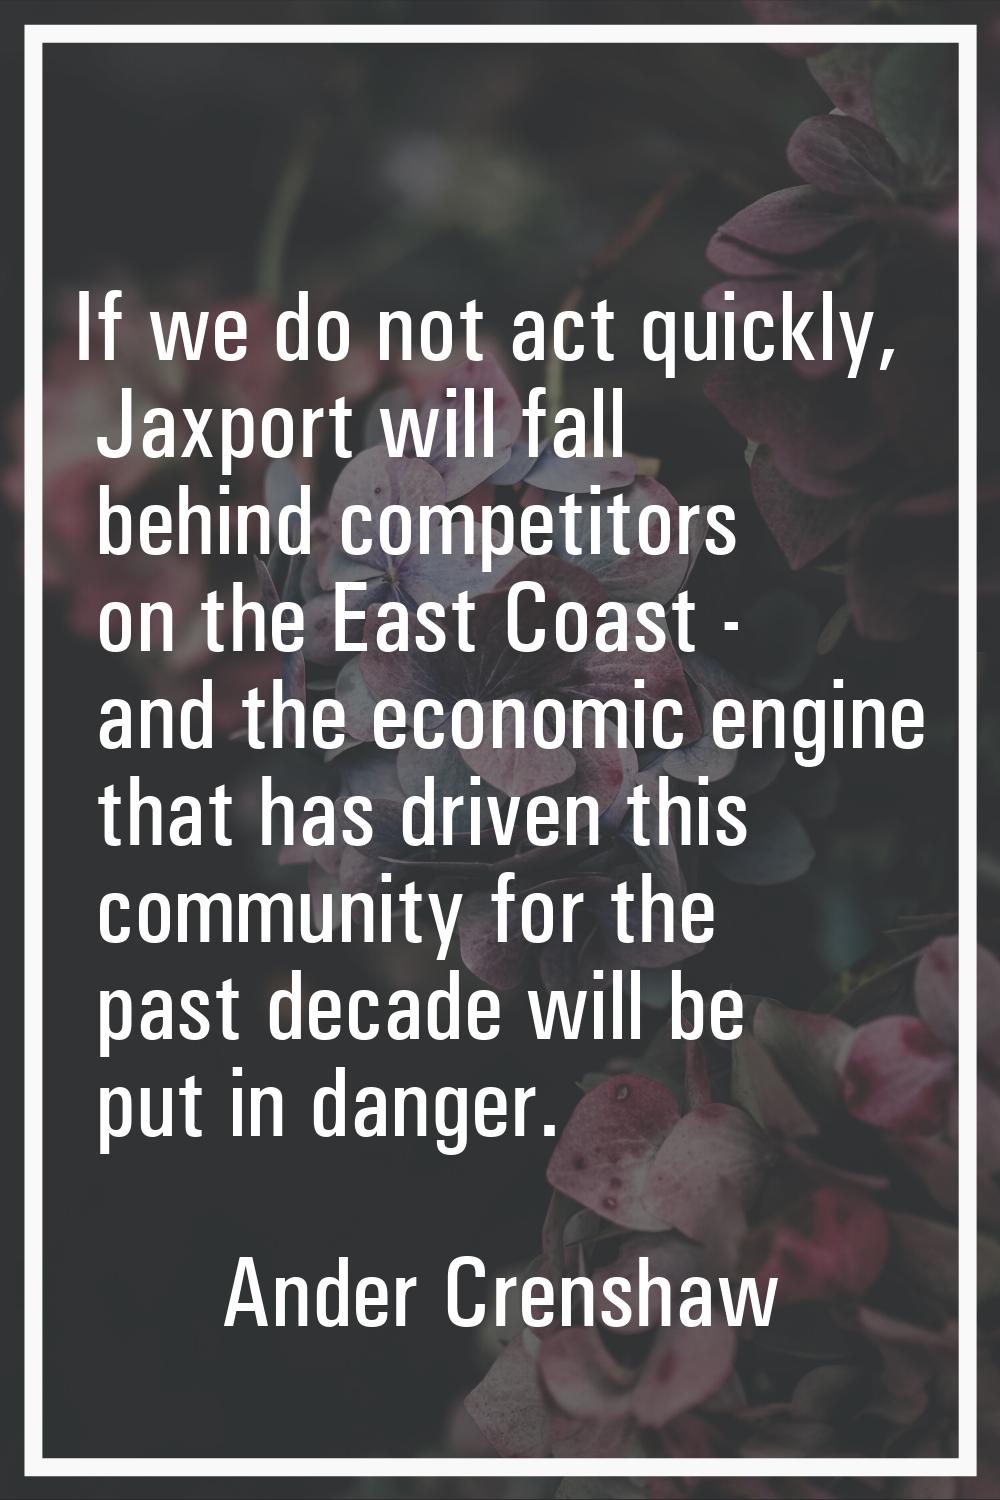 If we do not act quickly, Jaxport will fall behind competitors on the East Coast - and the economic